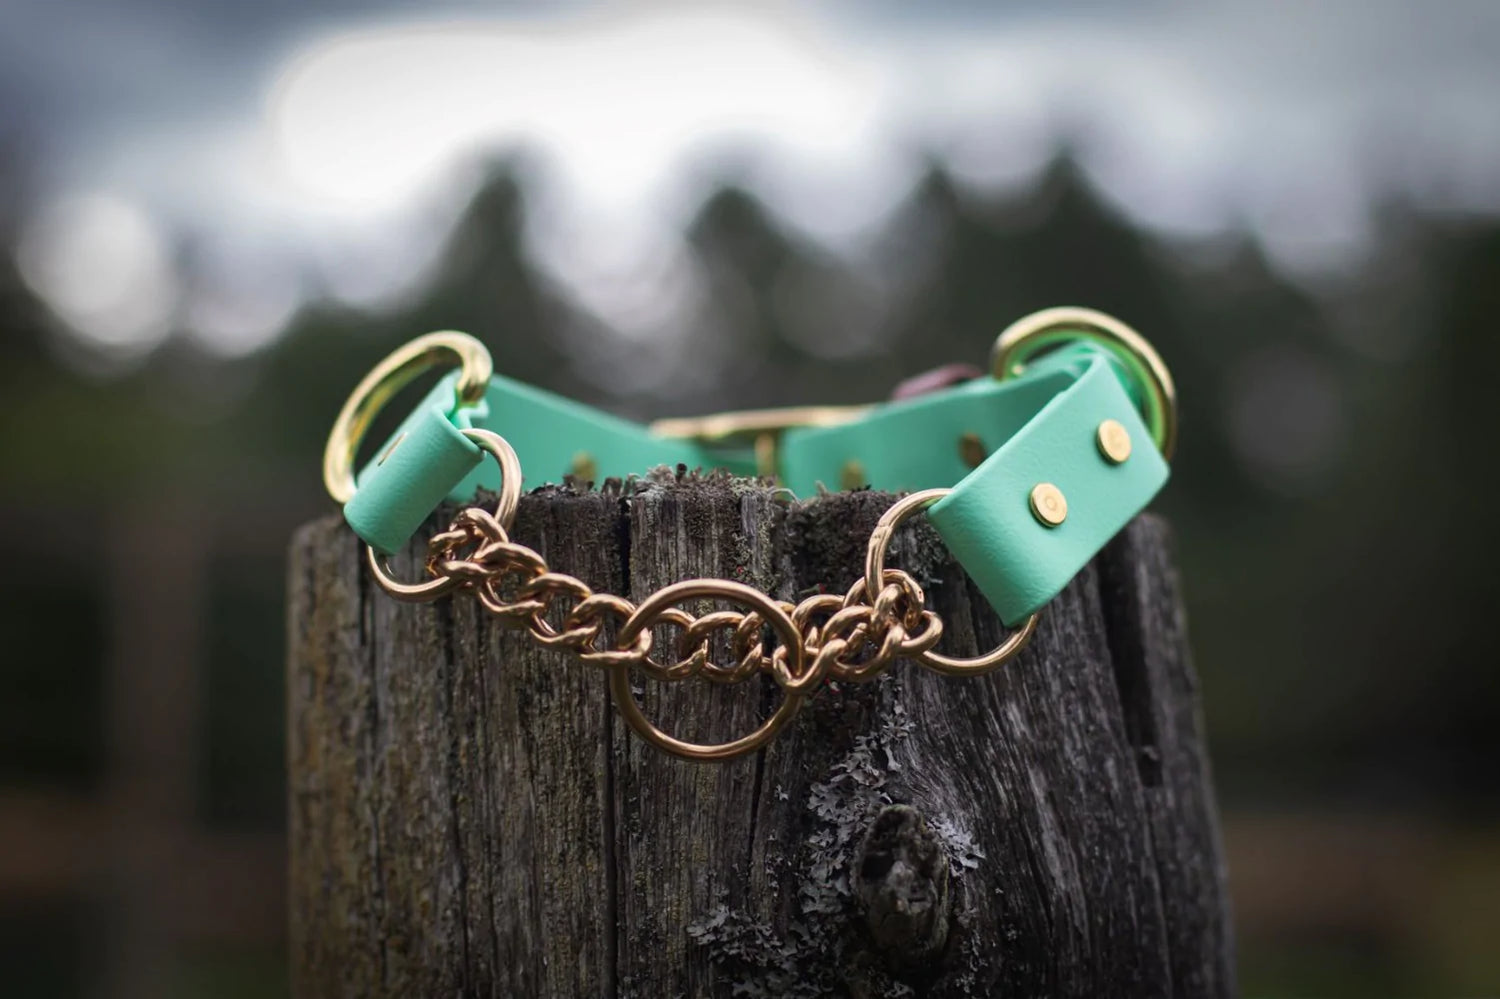 Backwoods Dog waterproof BioThane buckle martingale dog collar with brass hardware and mint webbing